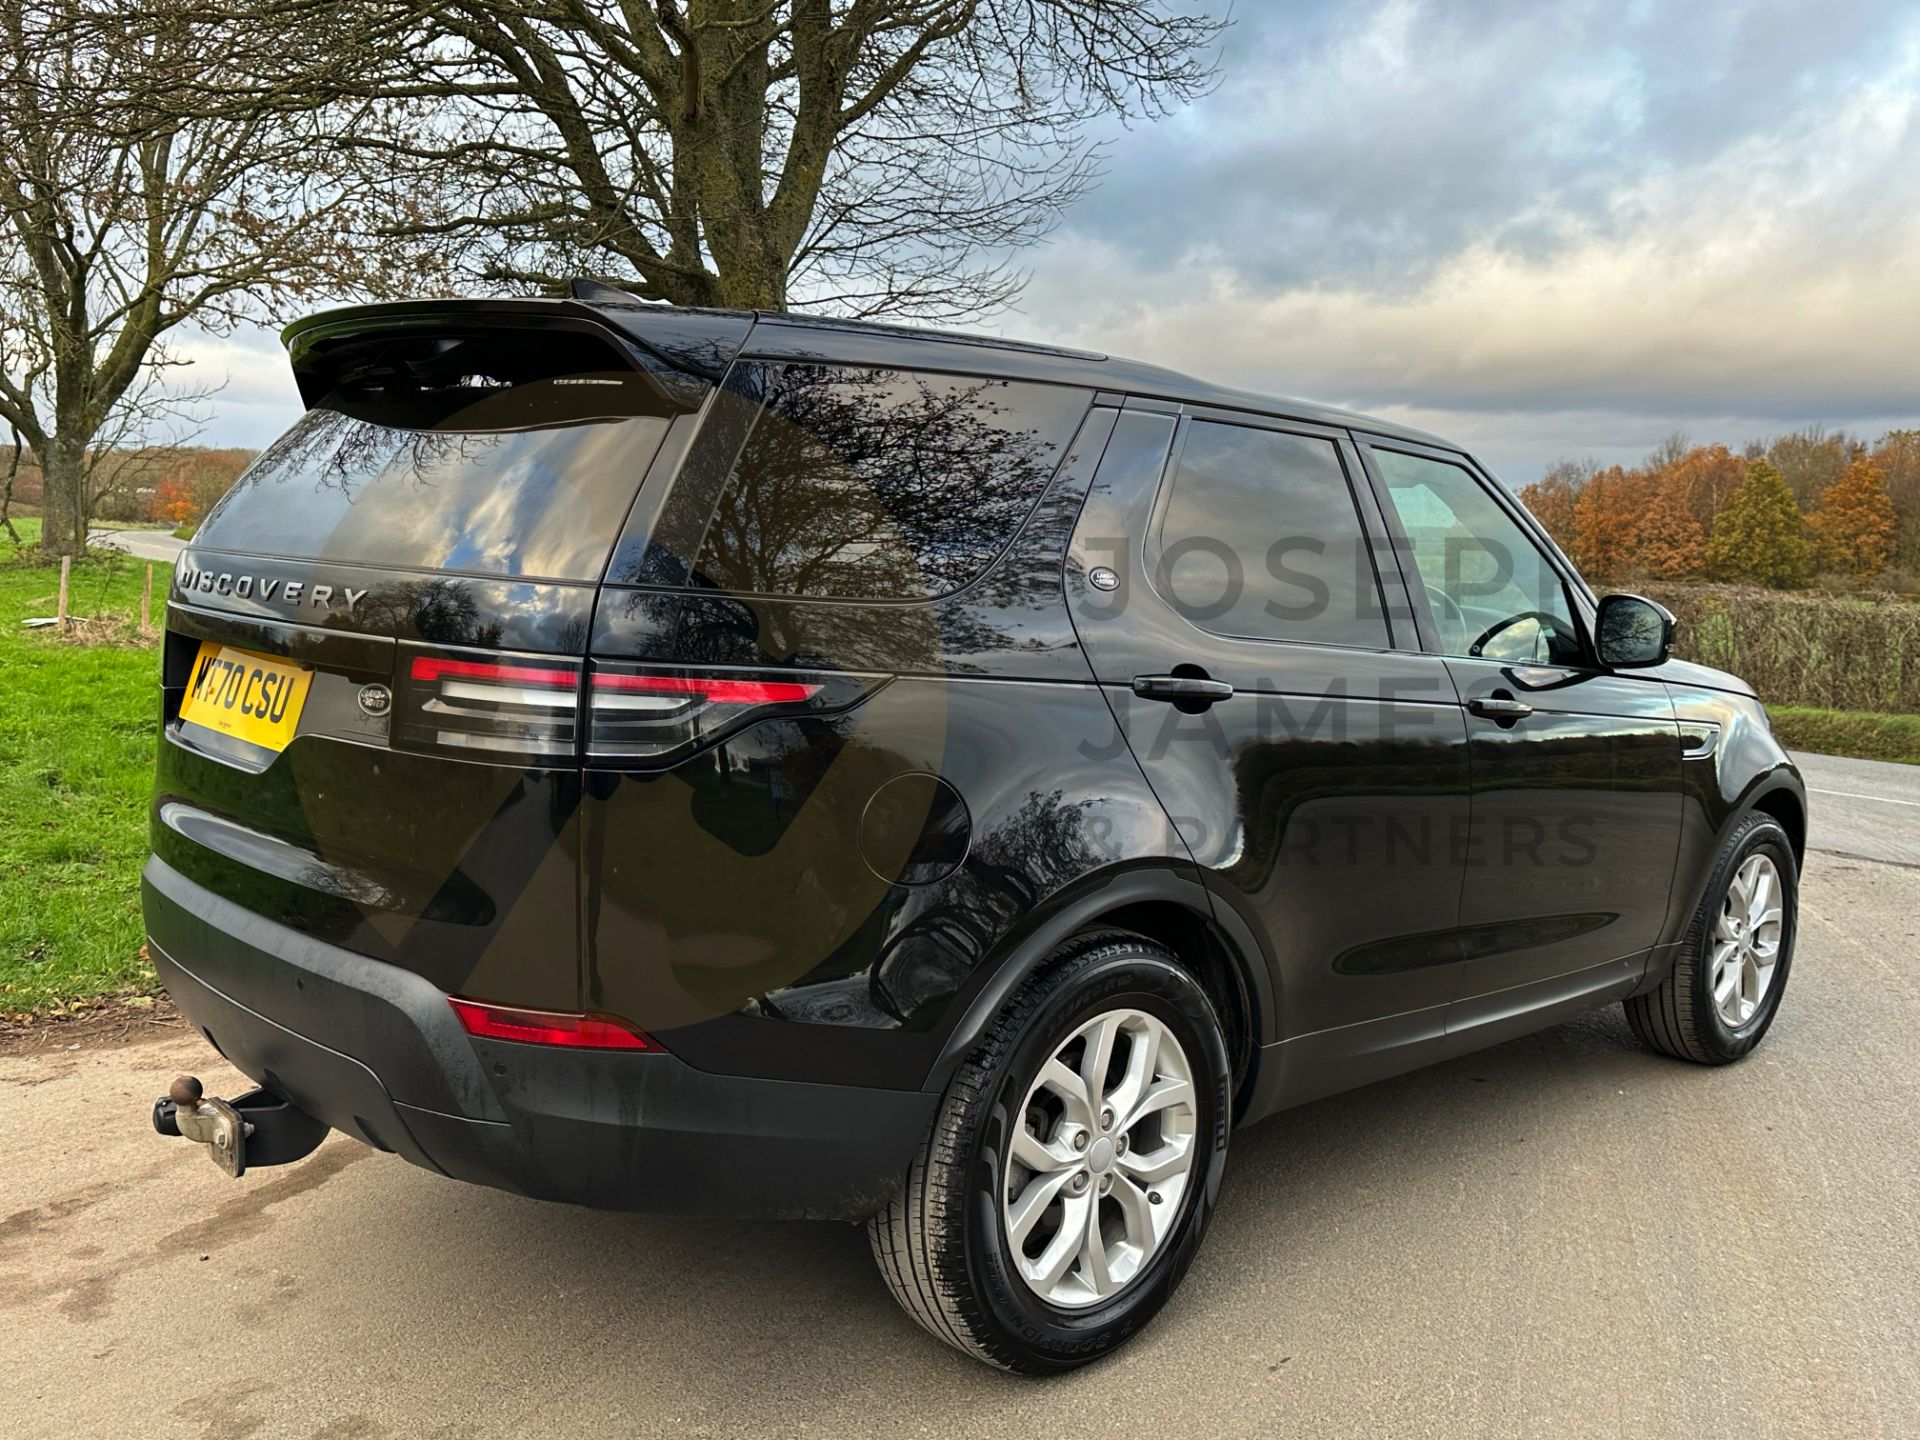 LAND ROVER DISCOVERY 5 *ALL NEW MODEL* (2021 - EURO 6) 8 SPEED AUTO (1 OWNER) *ONLY 19,000 MILES* - Image 12 of 50